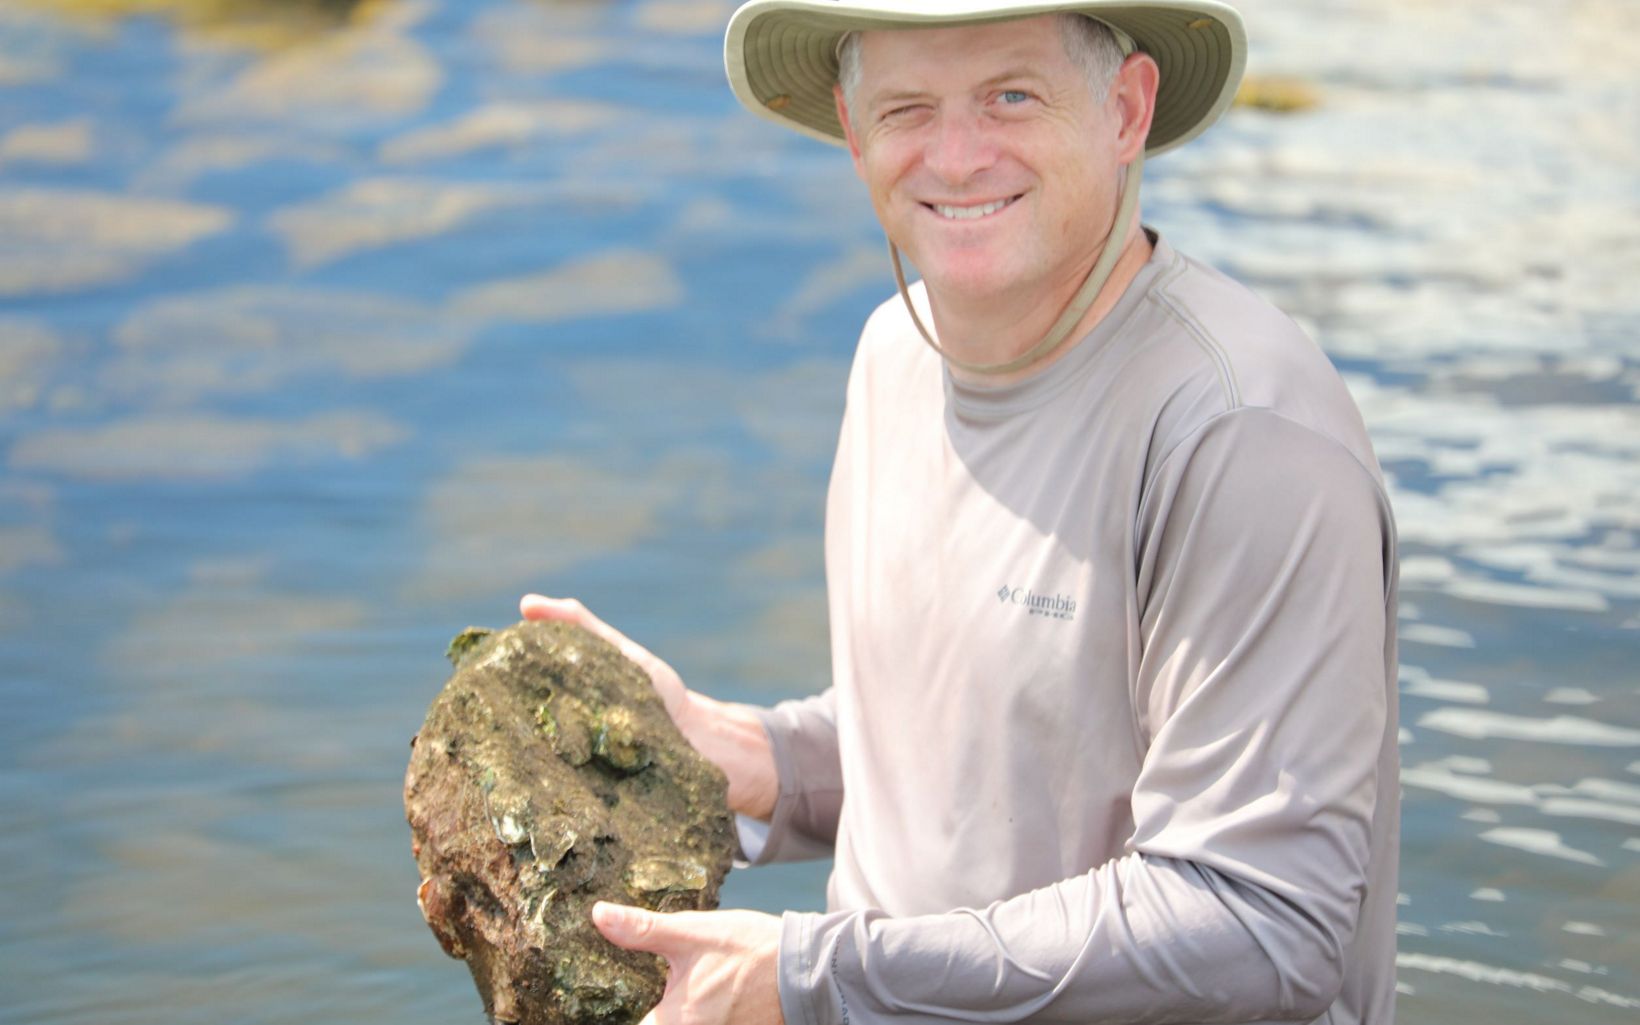 A man standing in waist-deep water holds up a rock that has oysters clinging to it.